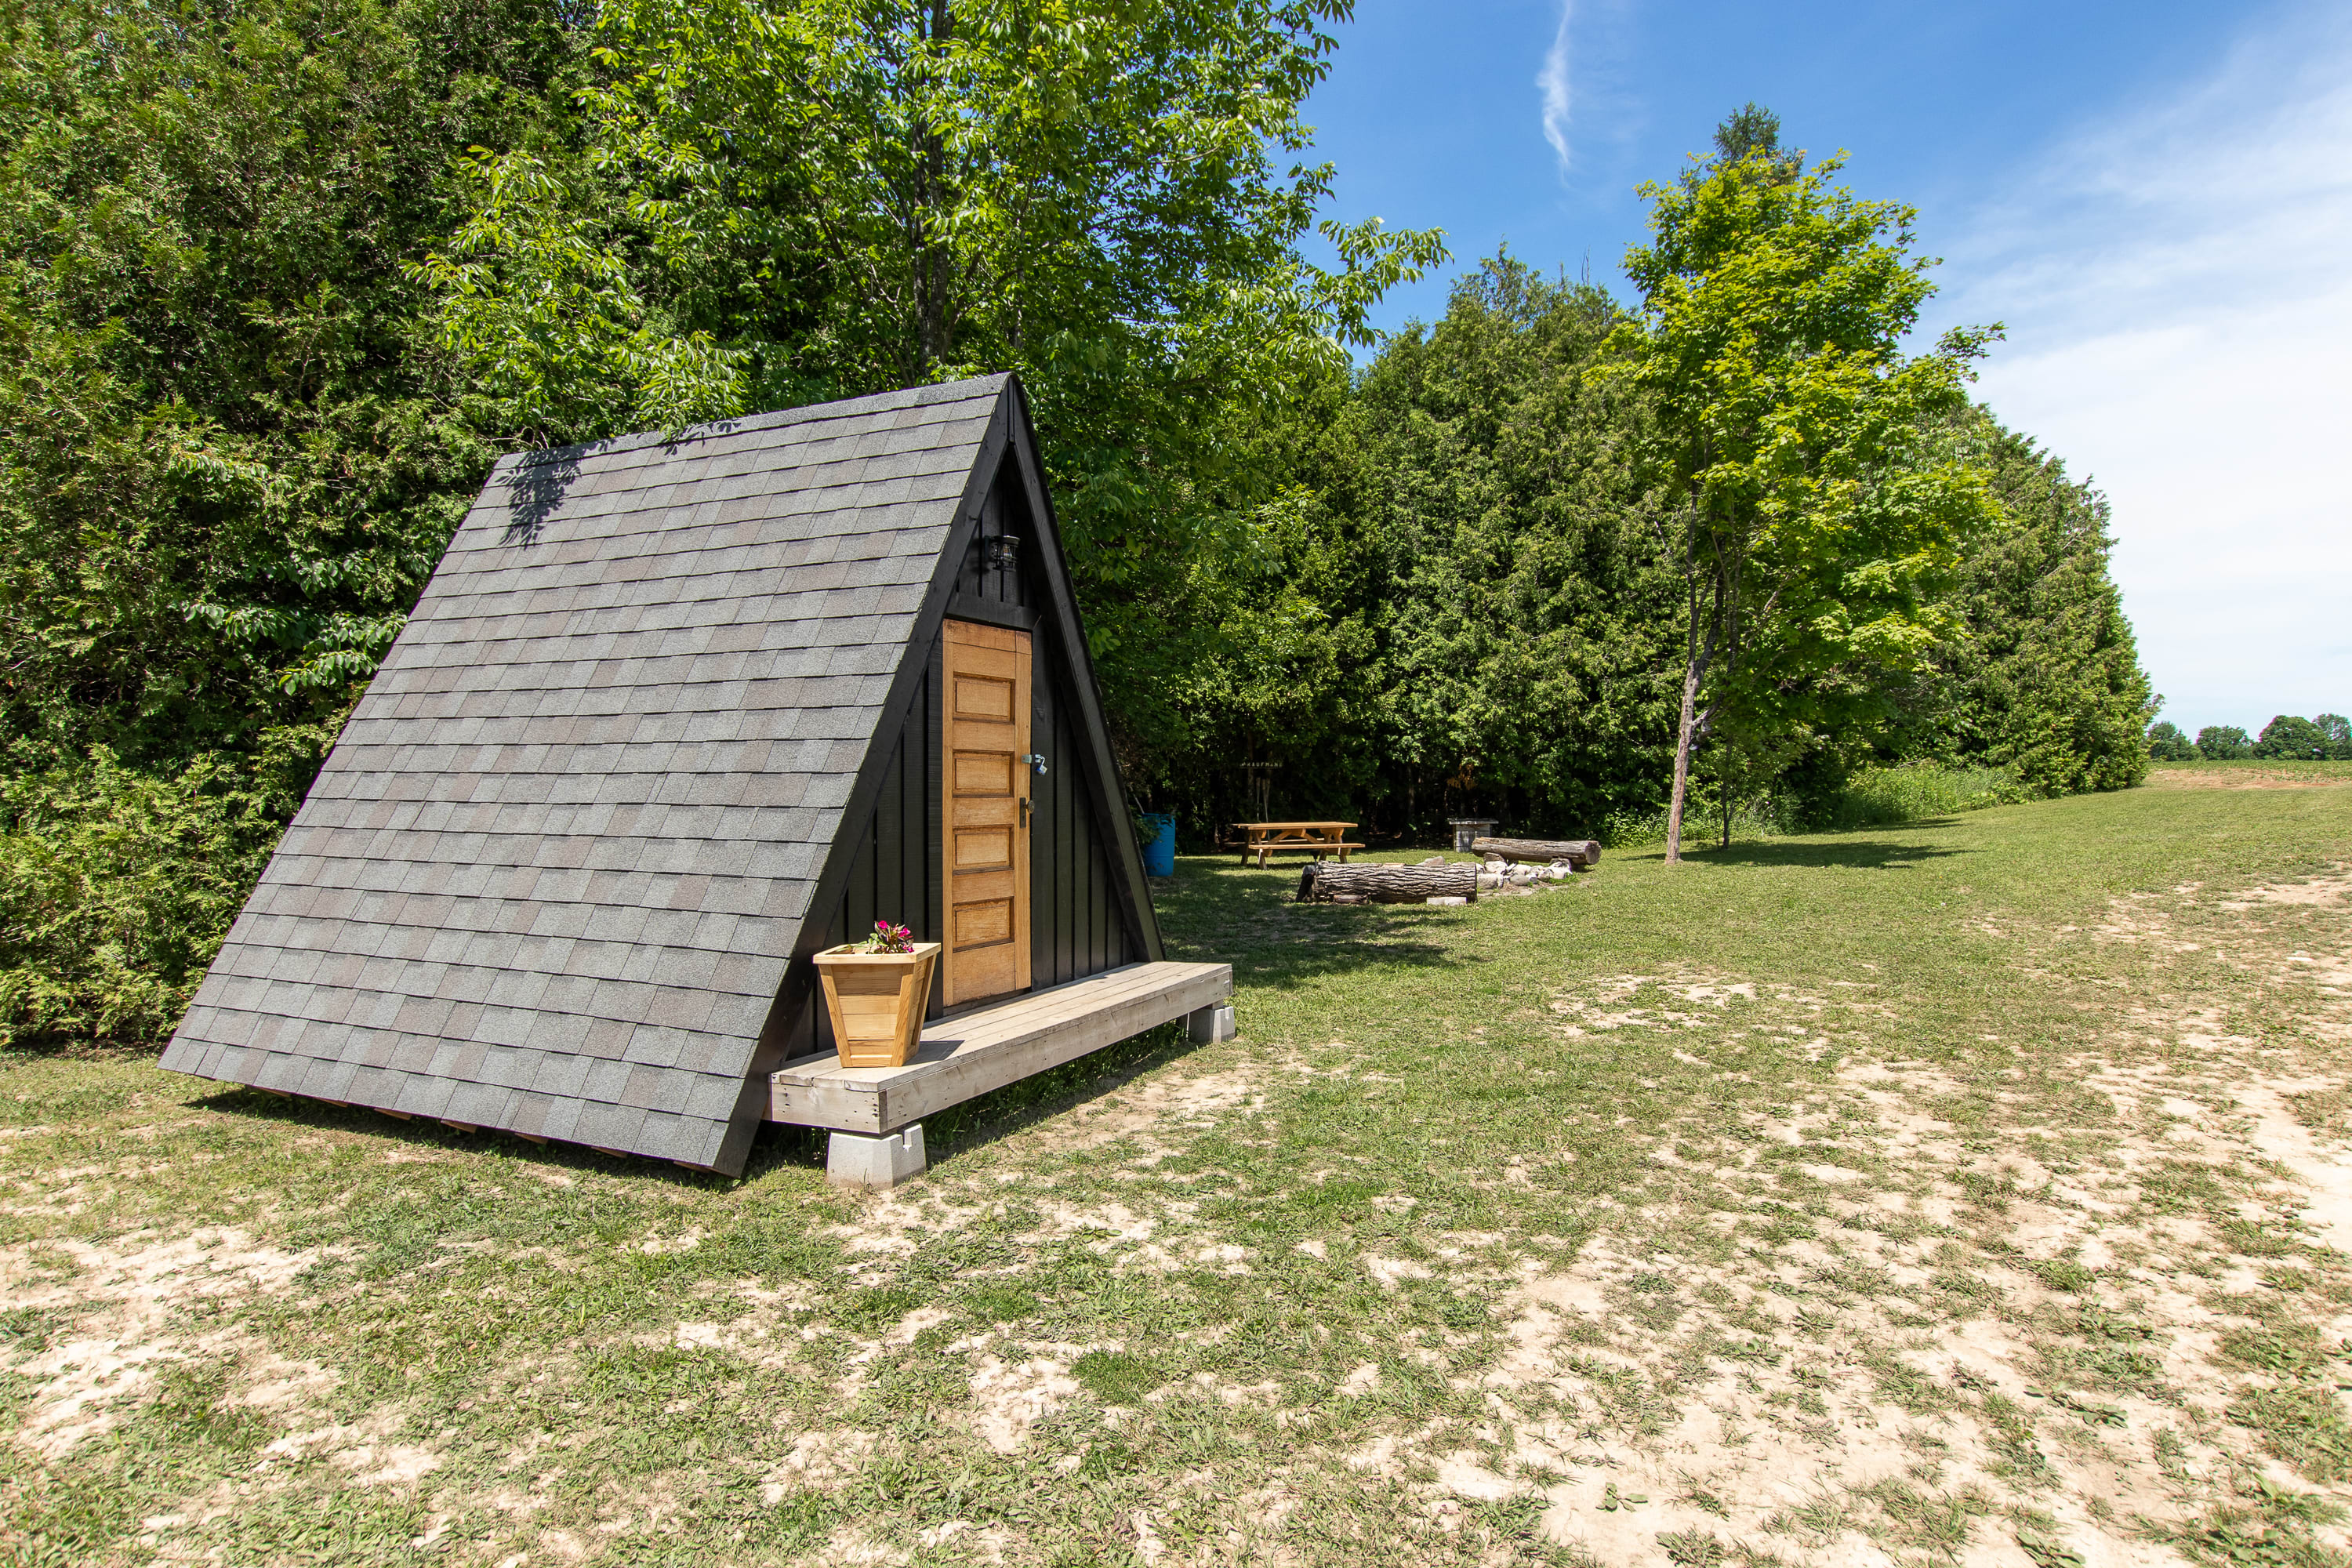 The A-frame sits on 65 acres of forest and farm fields.